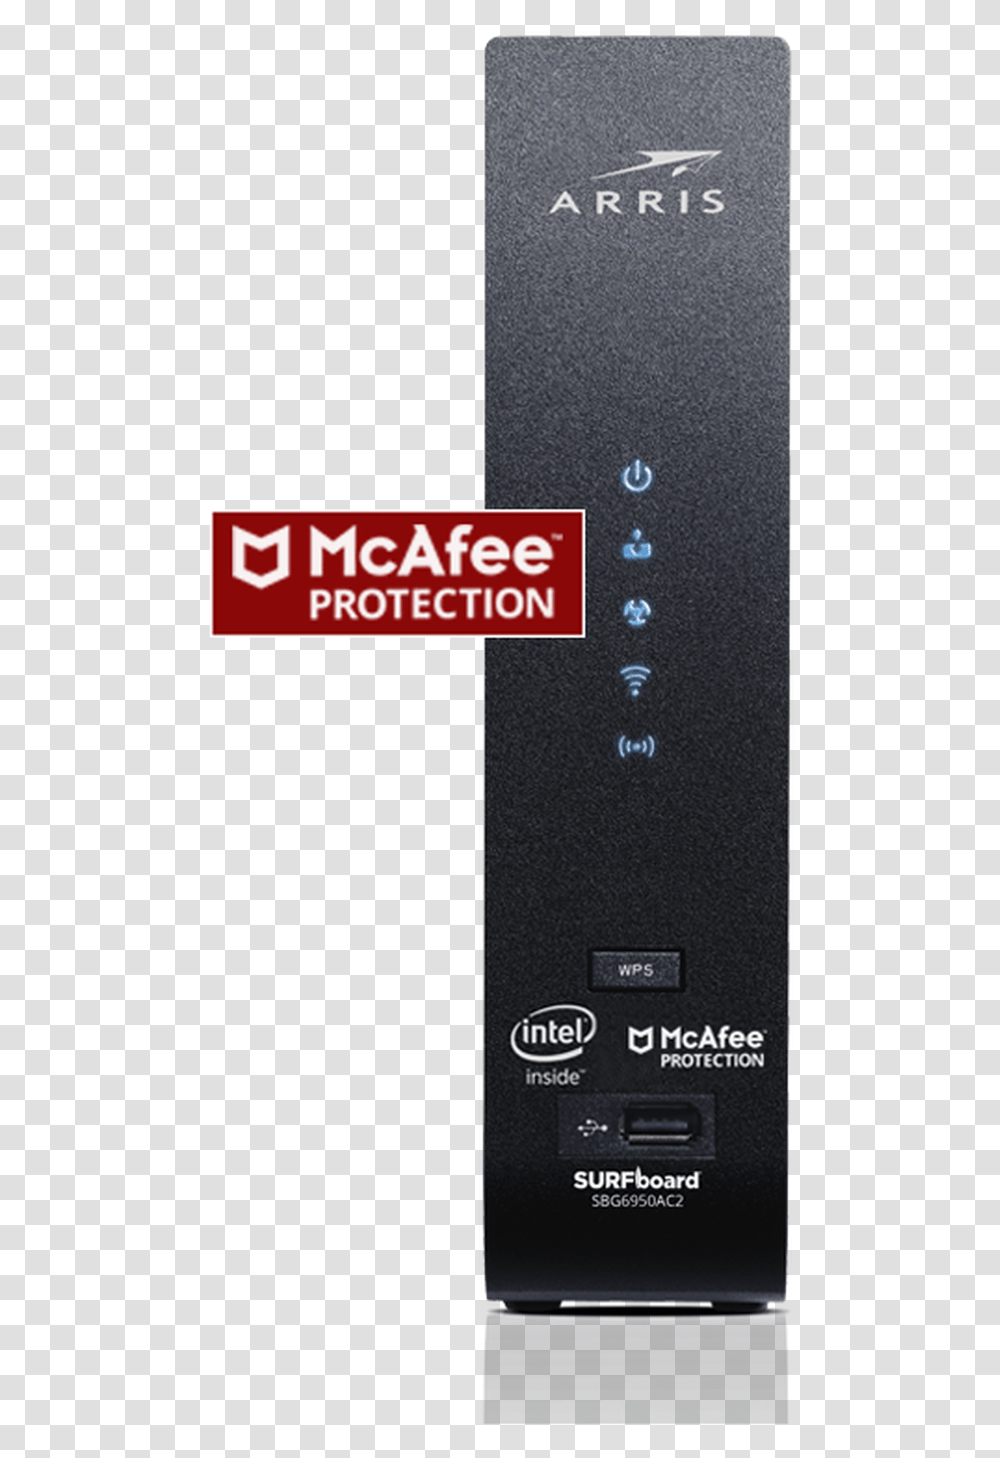 Cable Modem Amp Wi Fi Router With Mcafee Cosmetics, Mobile Phone, Electronics, Monitor Transparent Png